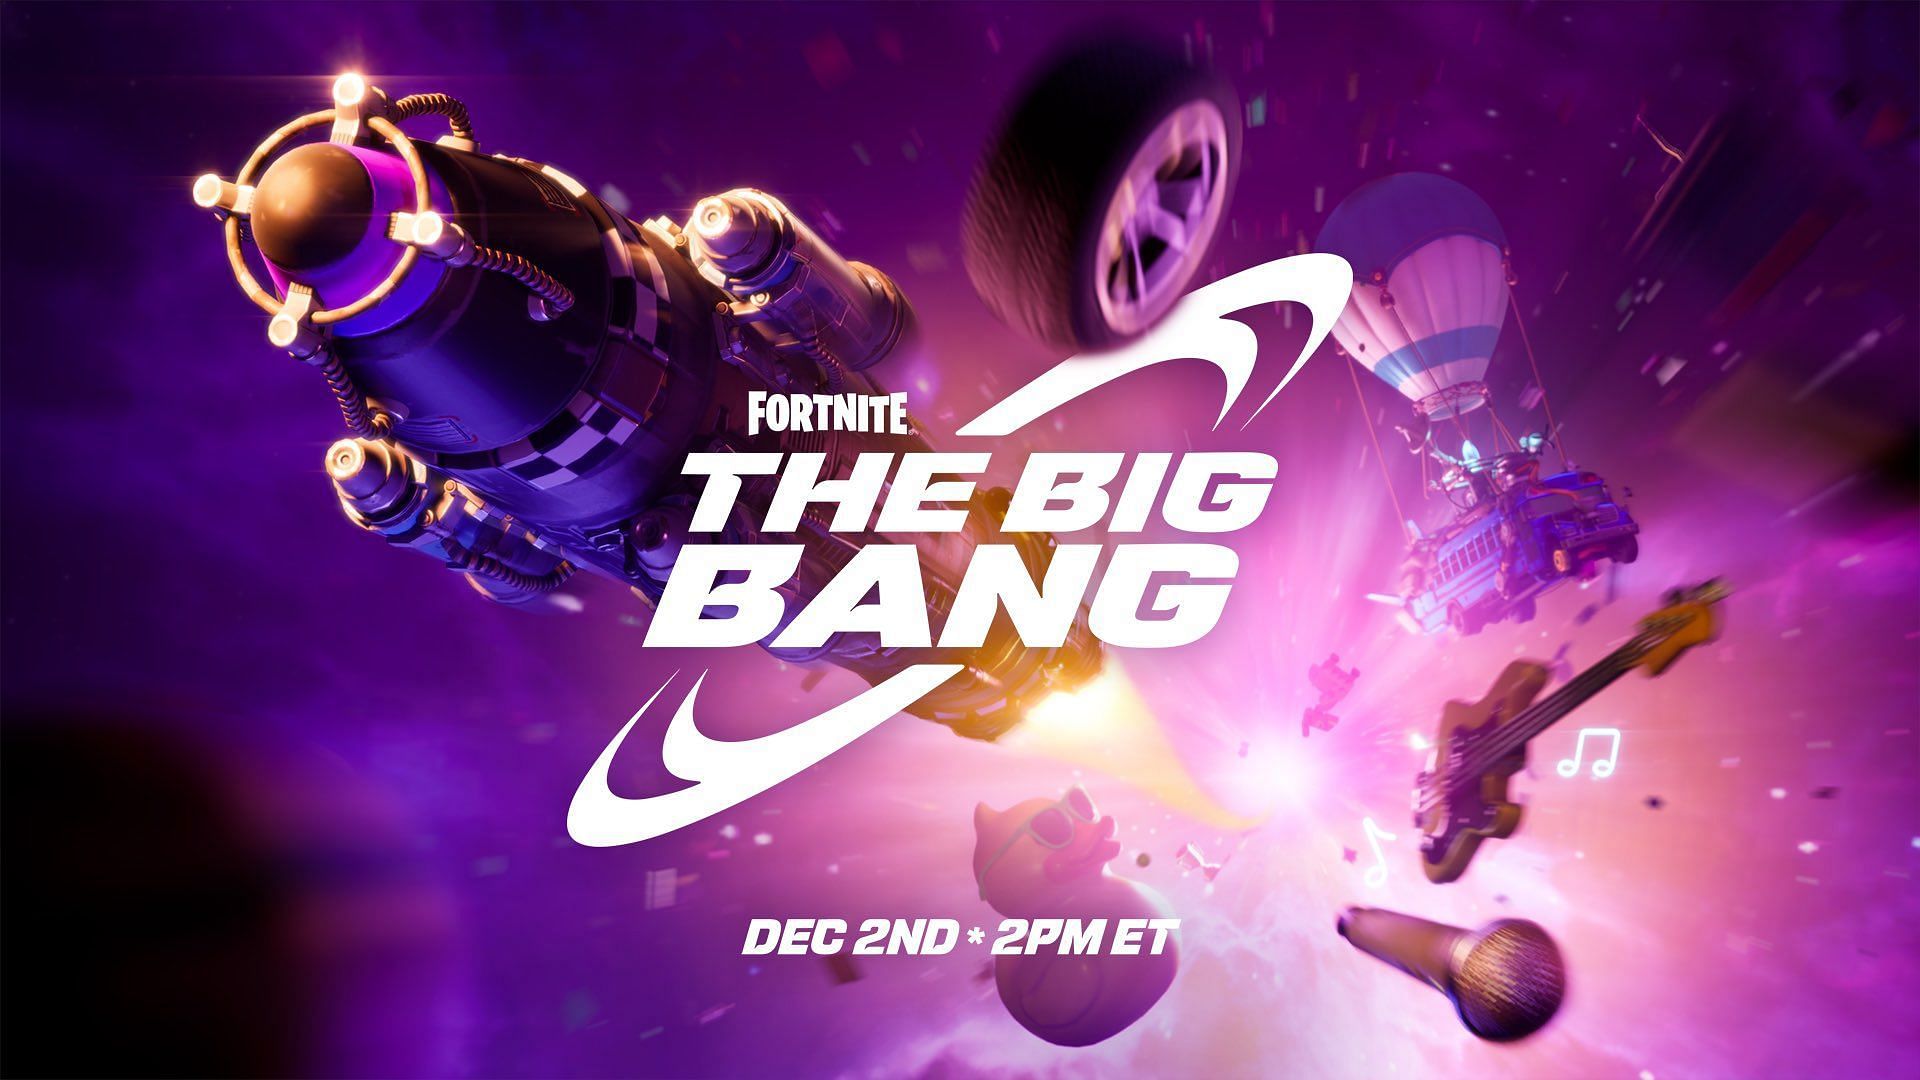 Fortnite Big Bang Live Event: Start date, timings, what to expect, and more